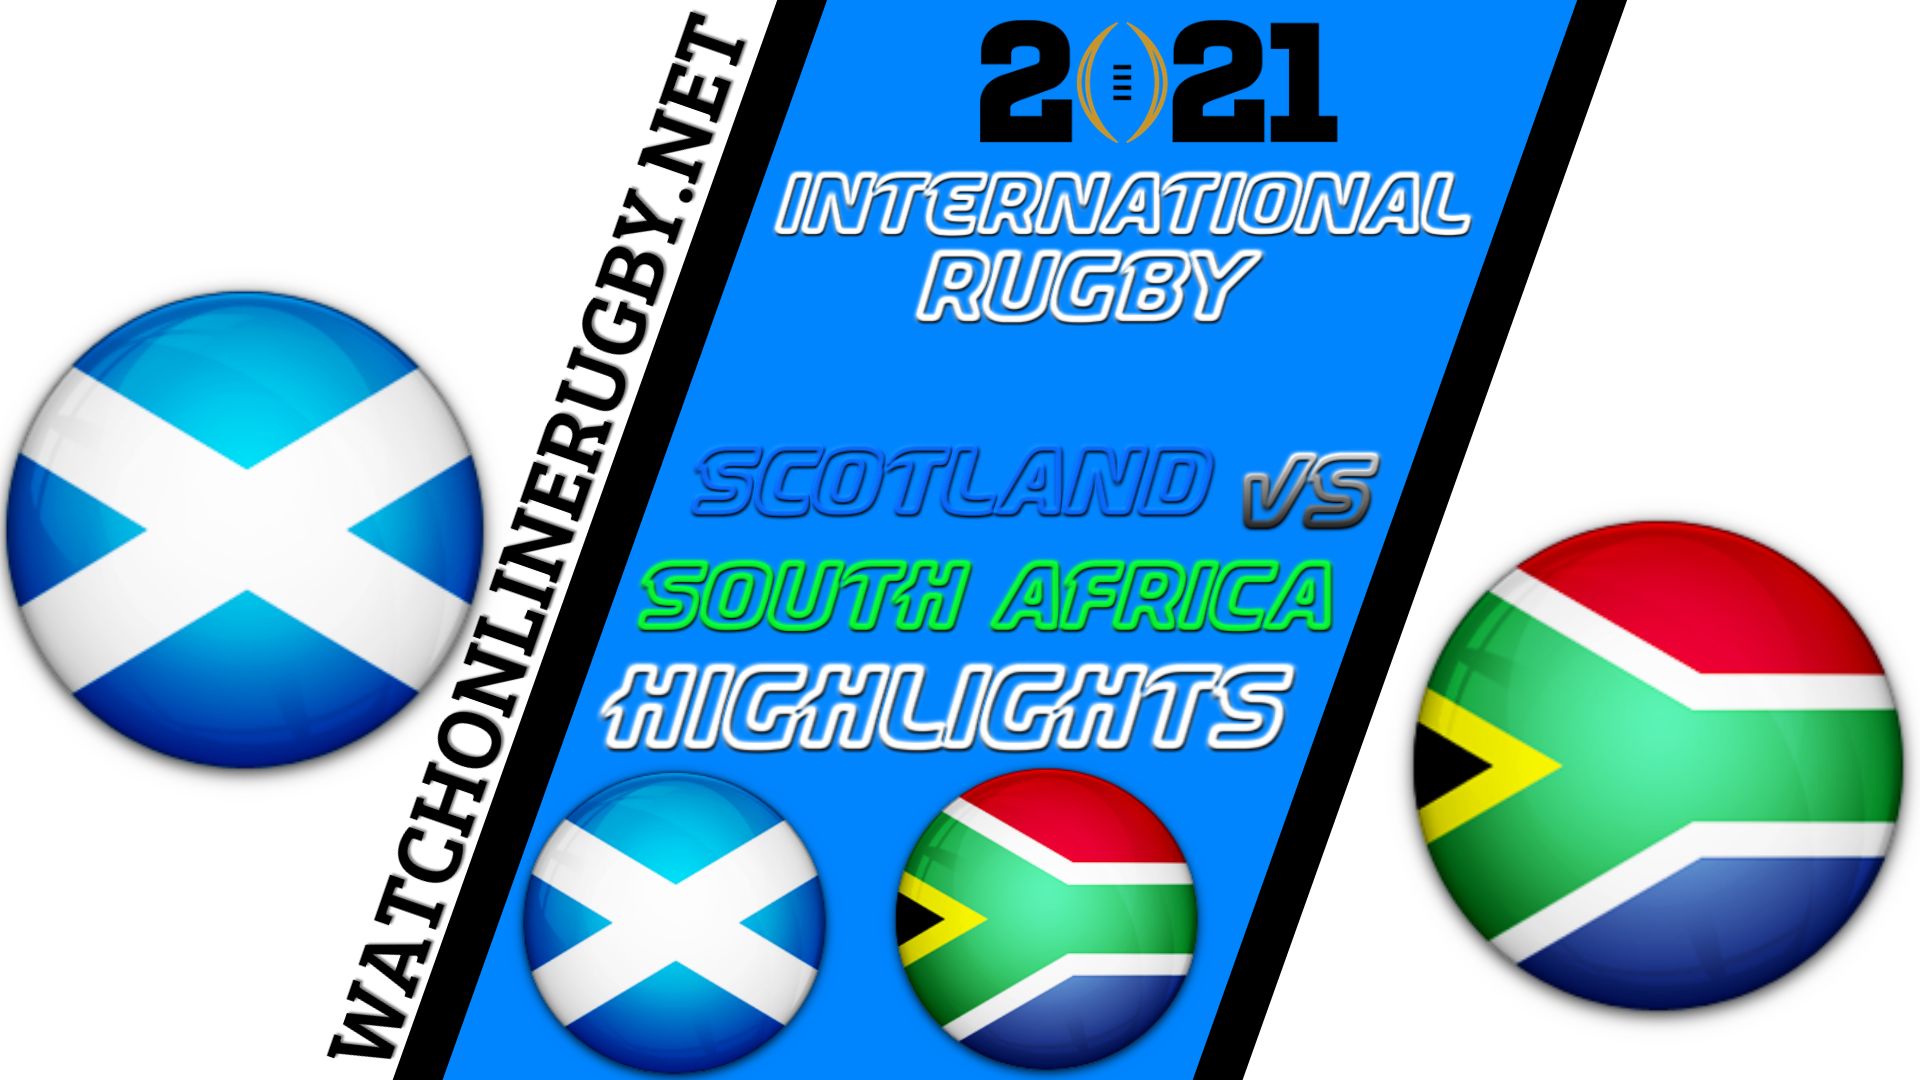 Scotland Vs South Africa International Rugby 2021